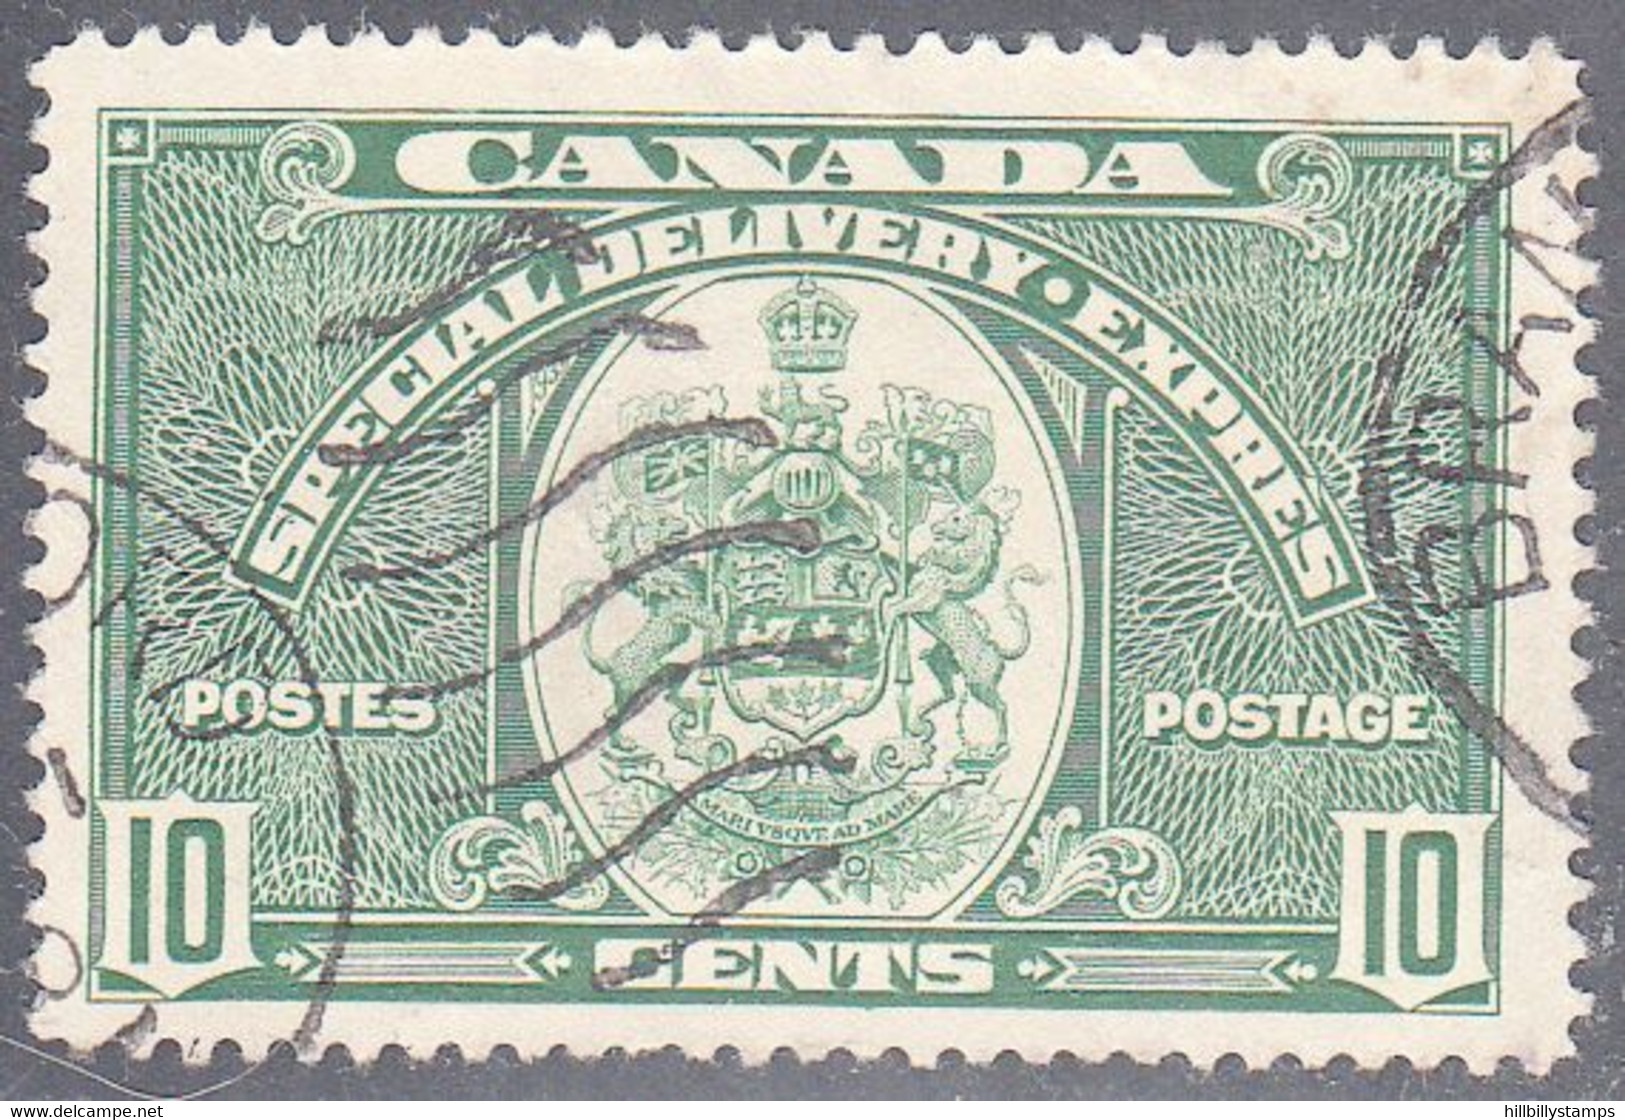 CANADA   SCOTT NO E7  USED   YEAR  1938 - Special Delivery